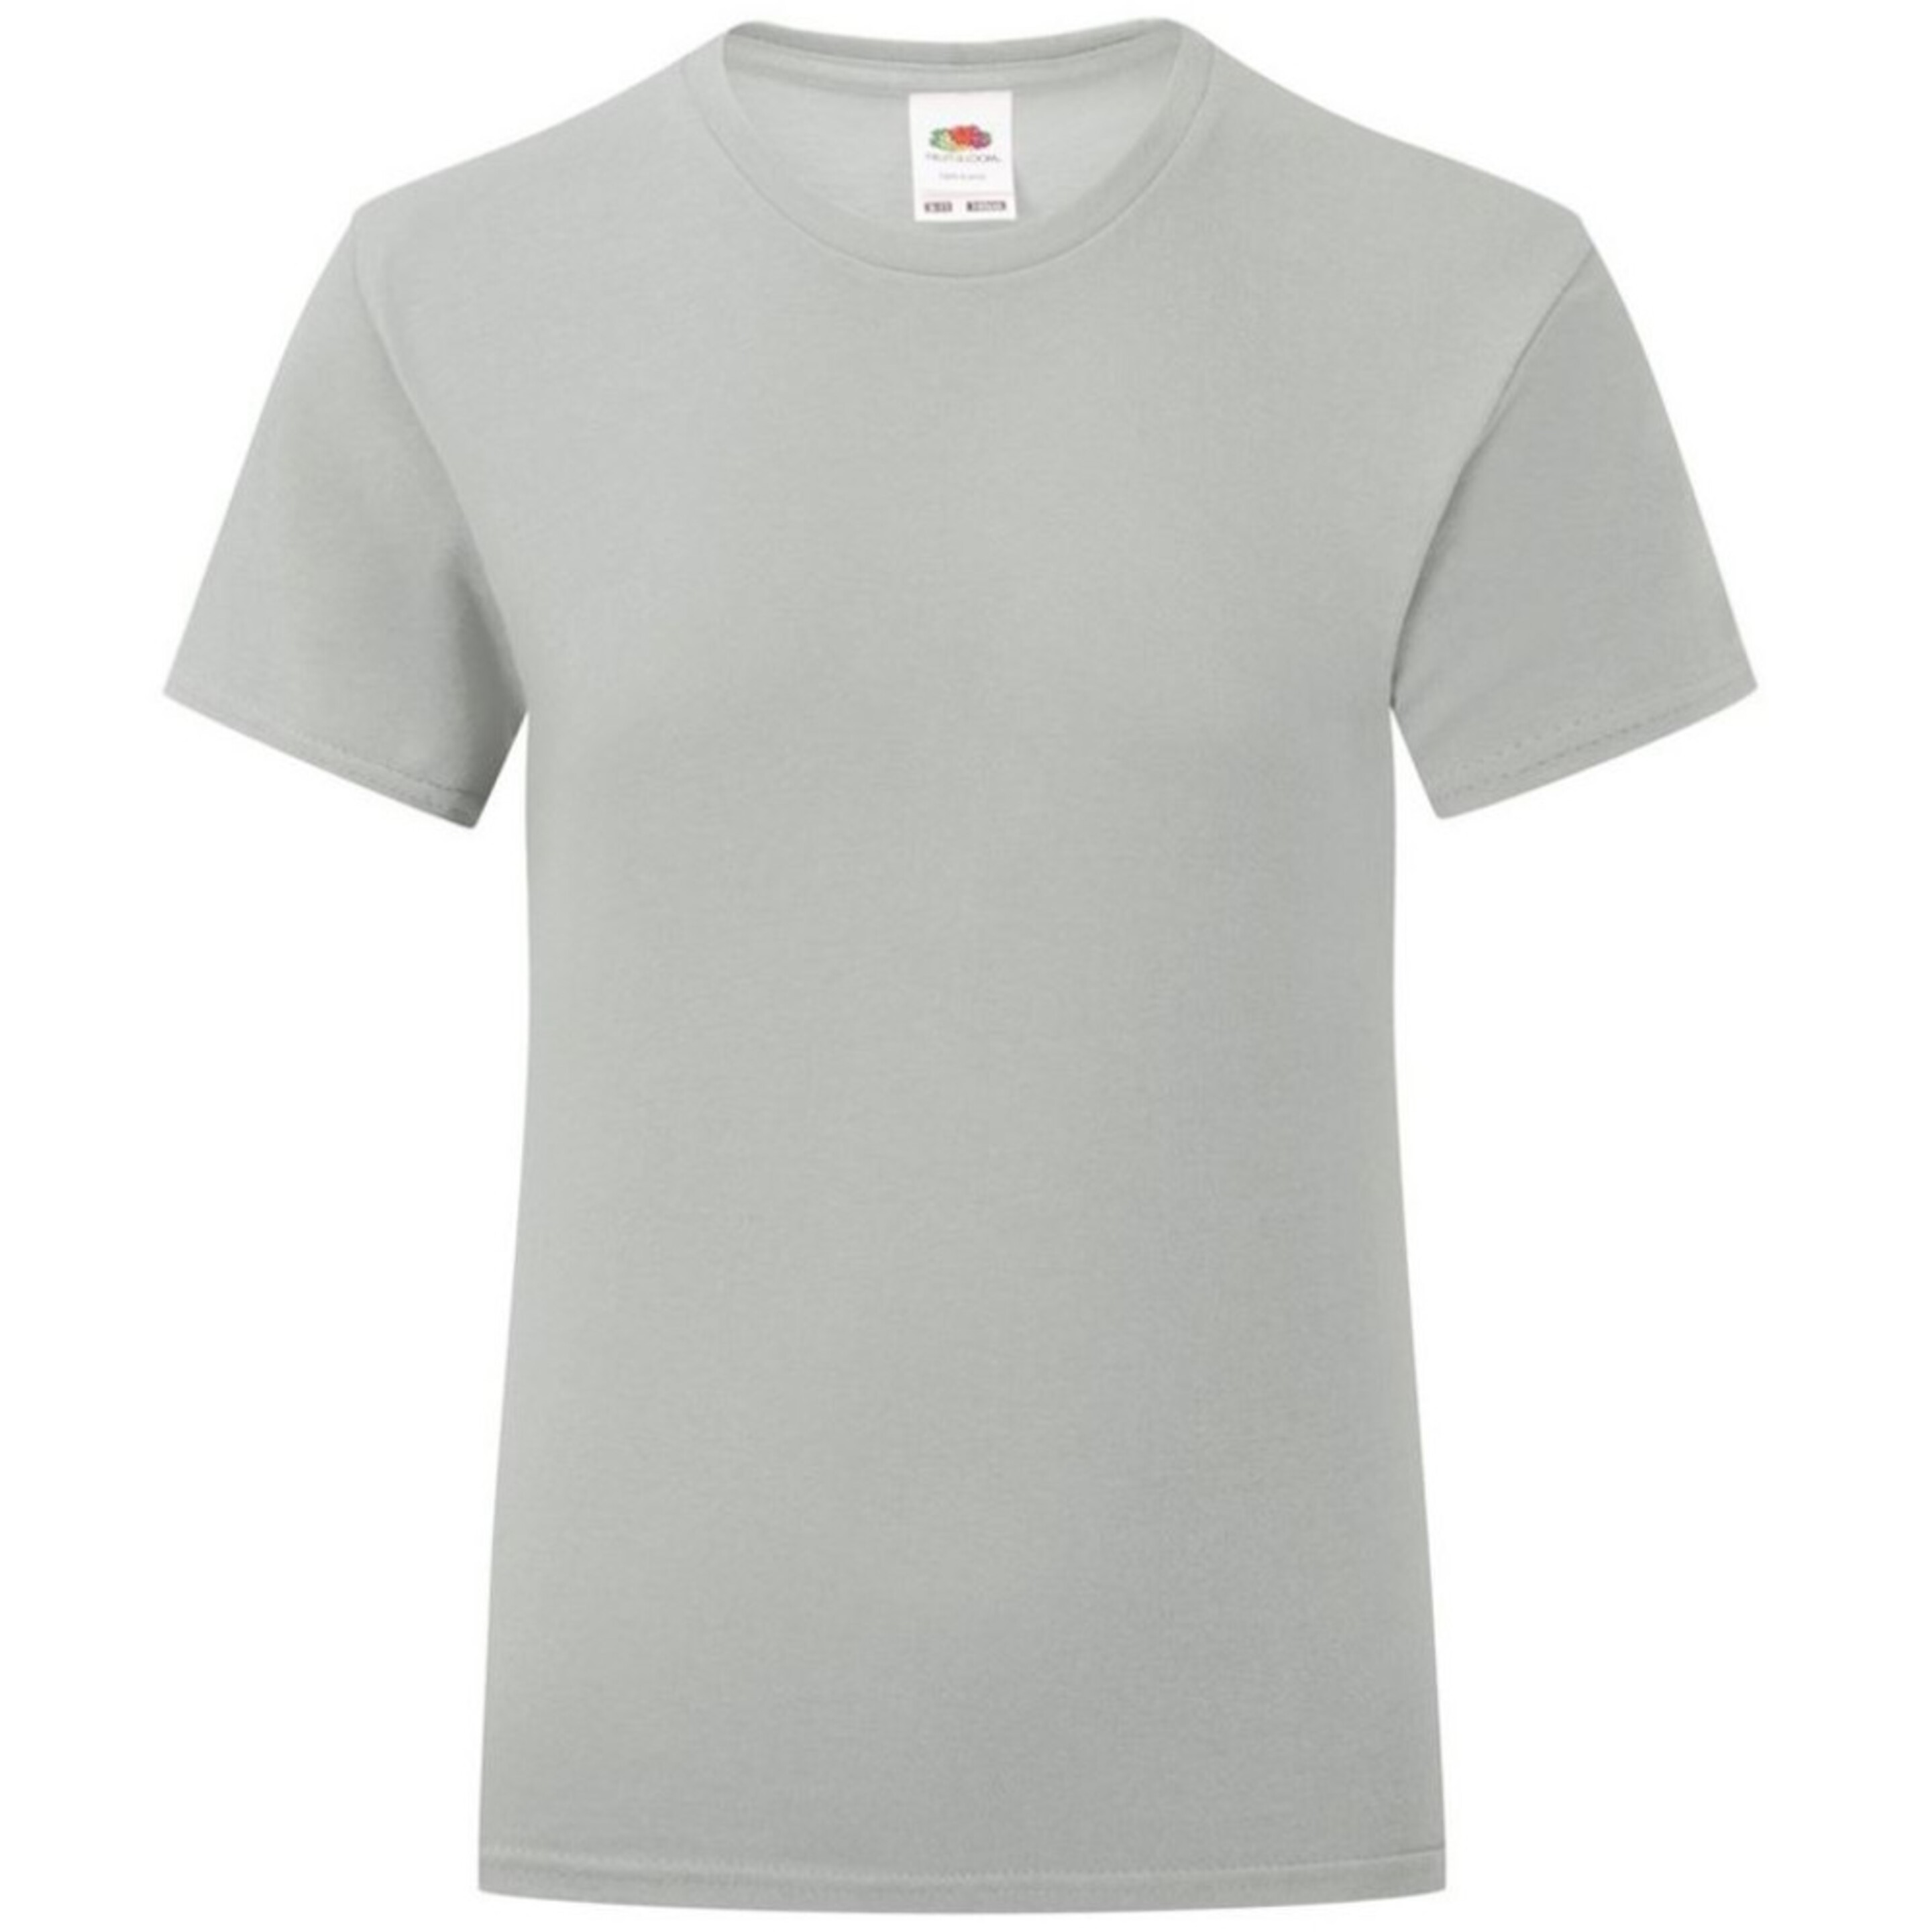 T-shirt Iconic Fruit Of The Loom - gris-claro - 